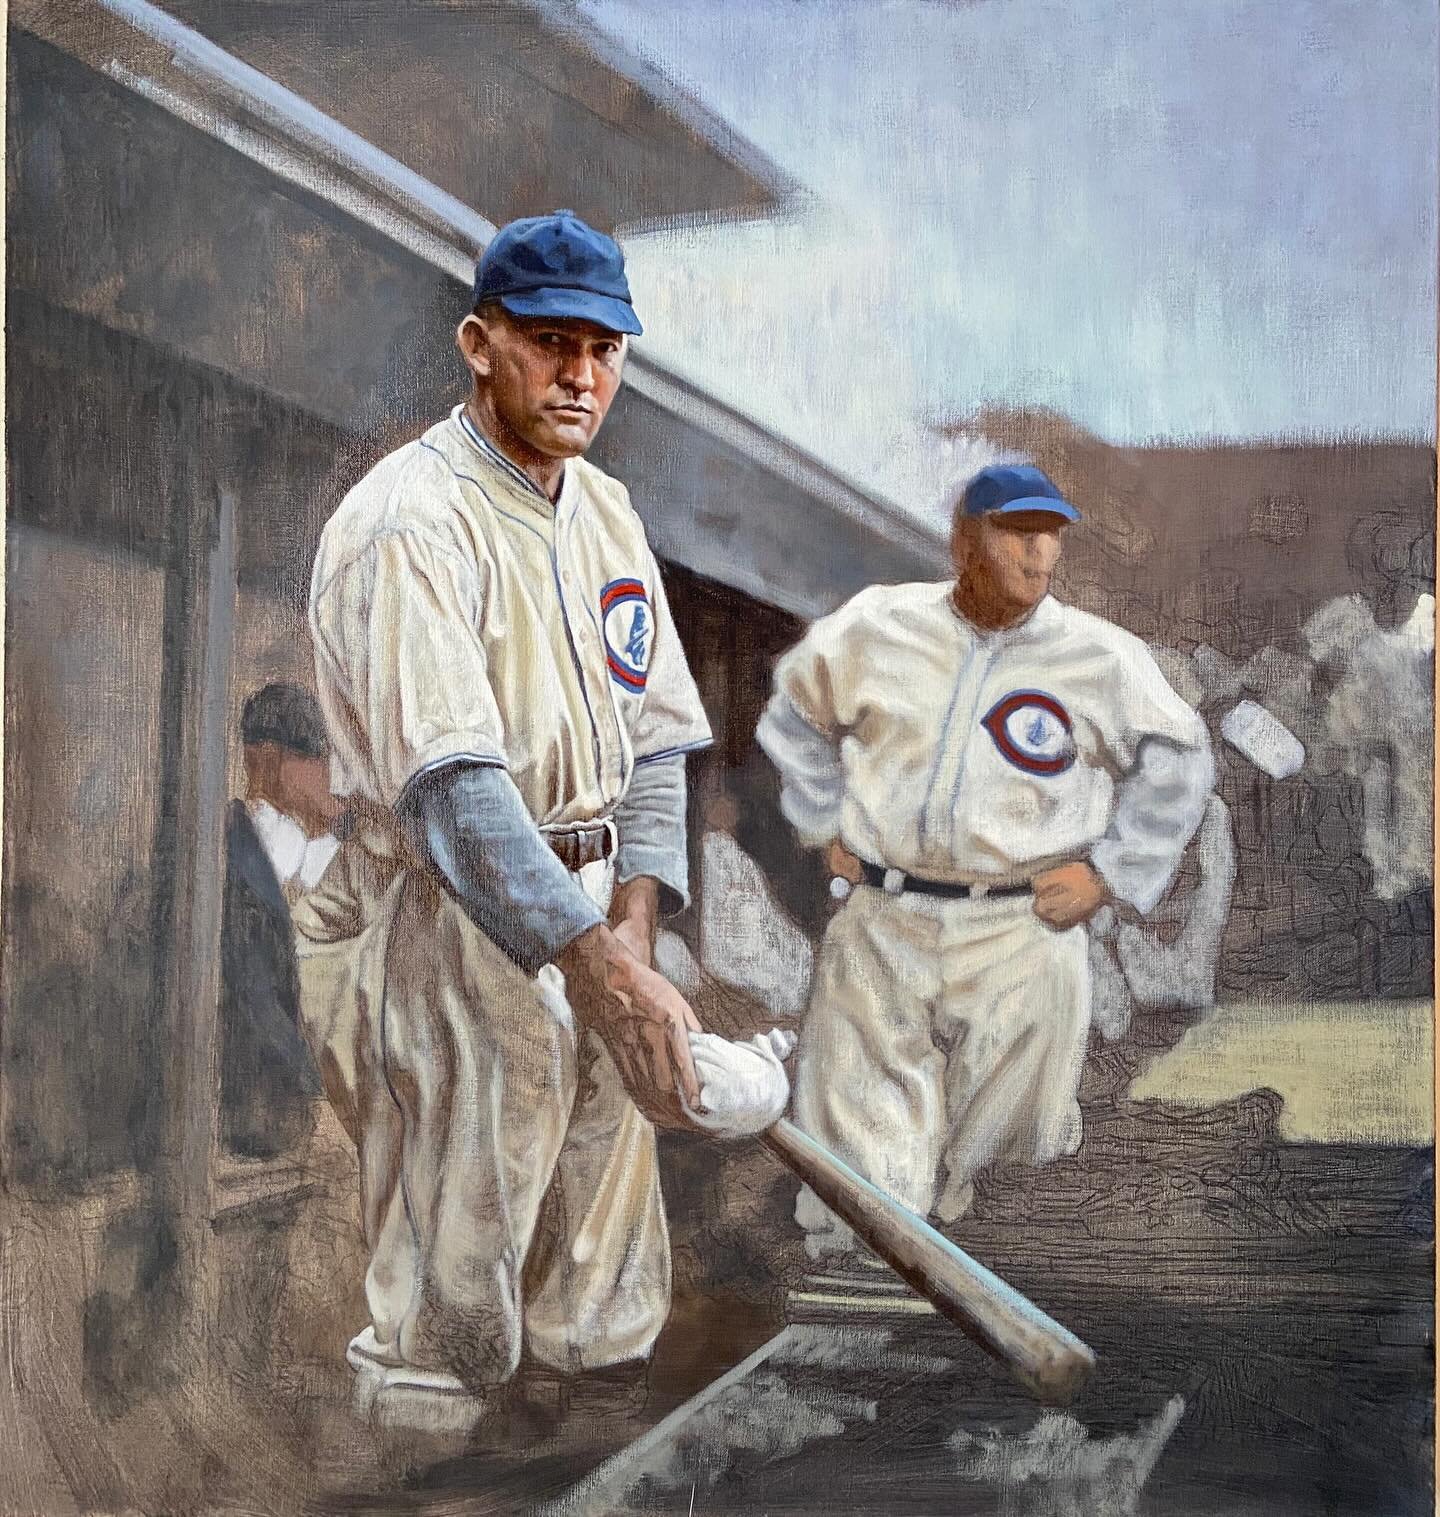 On this day in 1896, Rogers Hornsby was born in Winters, TX. One of the greatest hitters of ANY era, he batted .358 lifetime in 23 big league seasons. Here&rsquo;s an in-progress painting of him with the Cubs in 1929&ndash;gotta jump back on this one